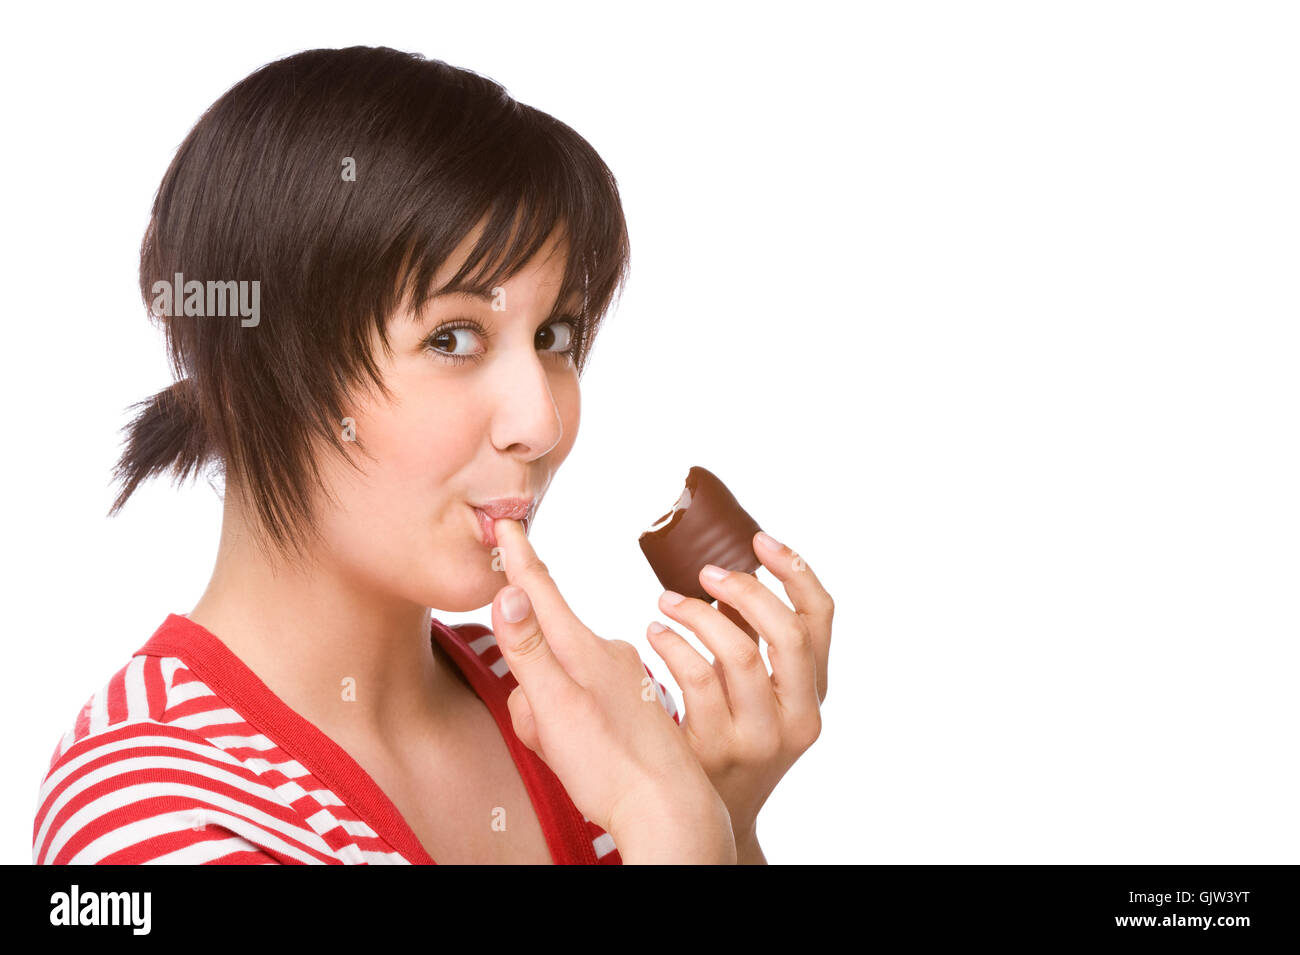 young woman with a mohrenkopf Stock Photo